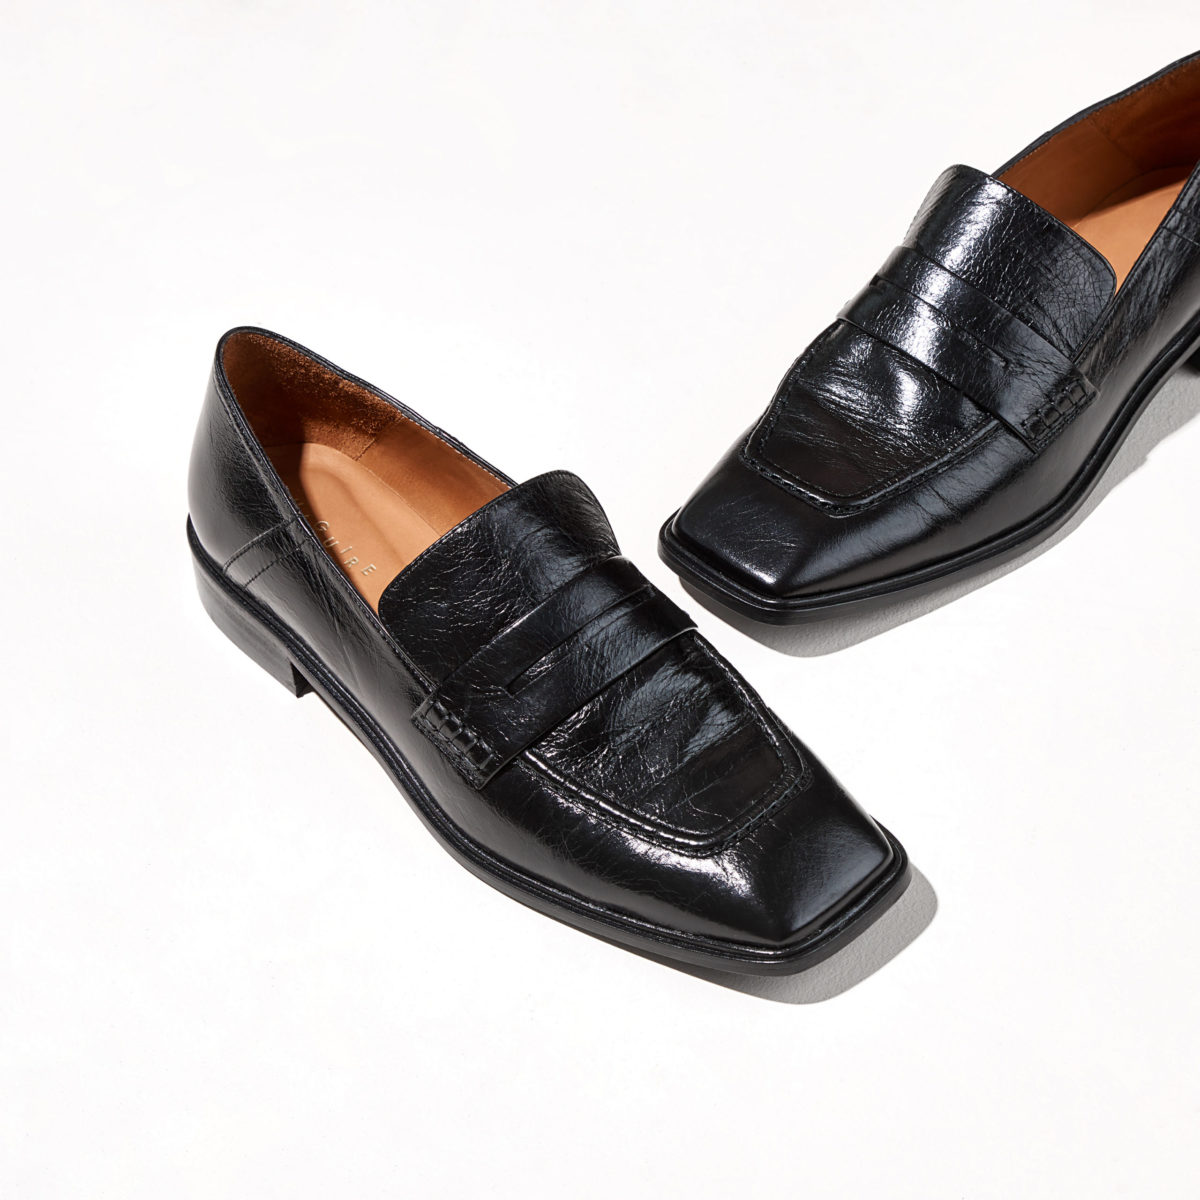 A pair of black leather loafers